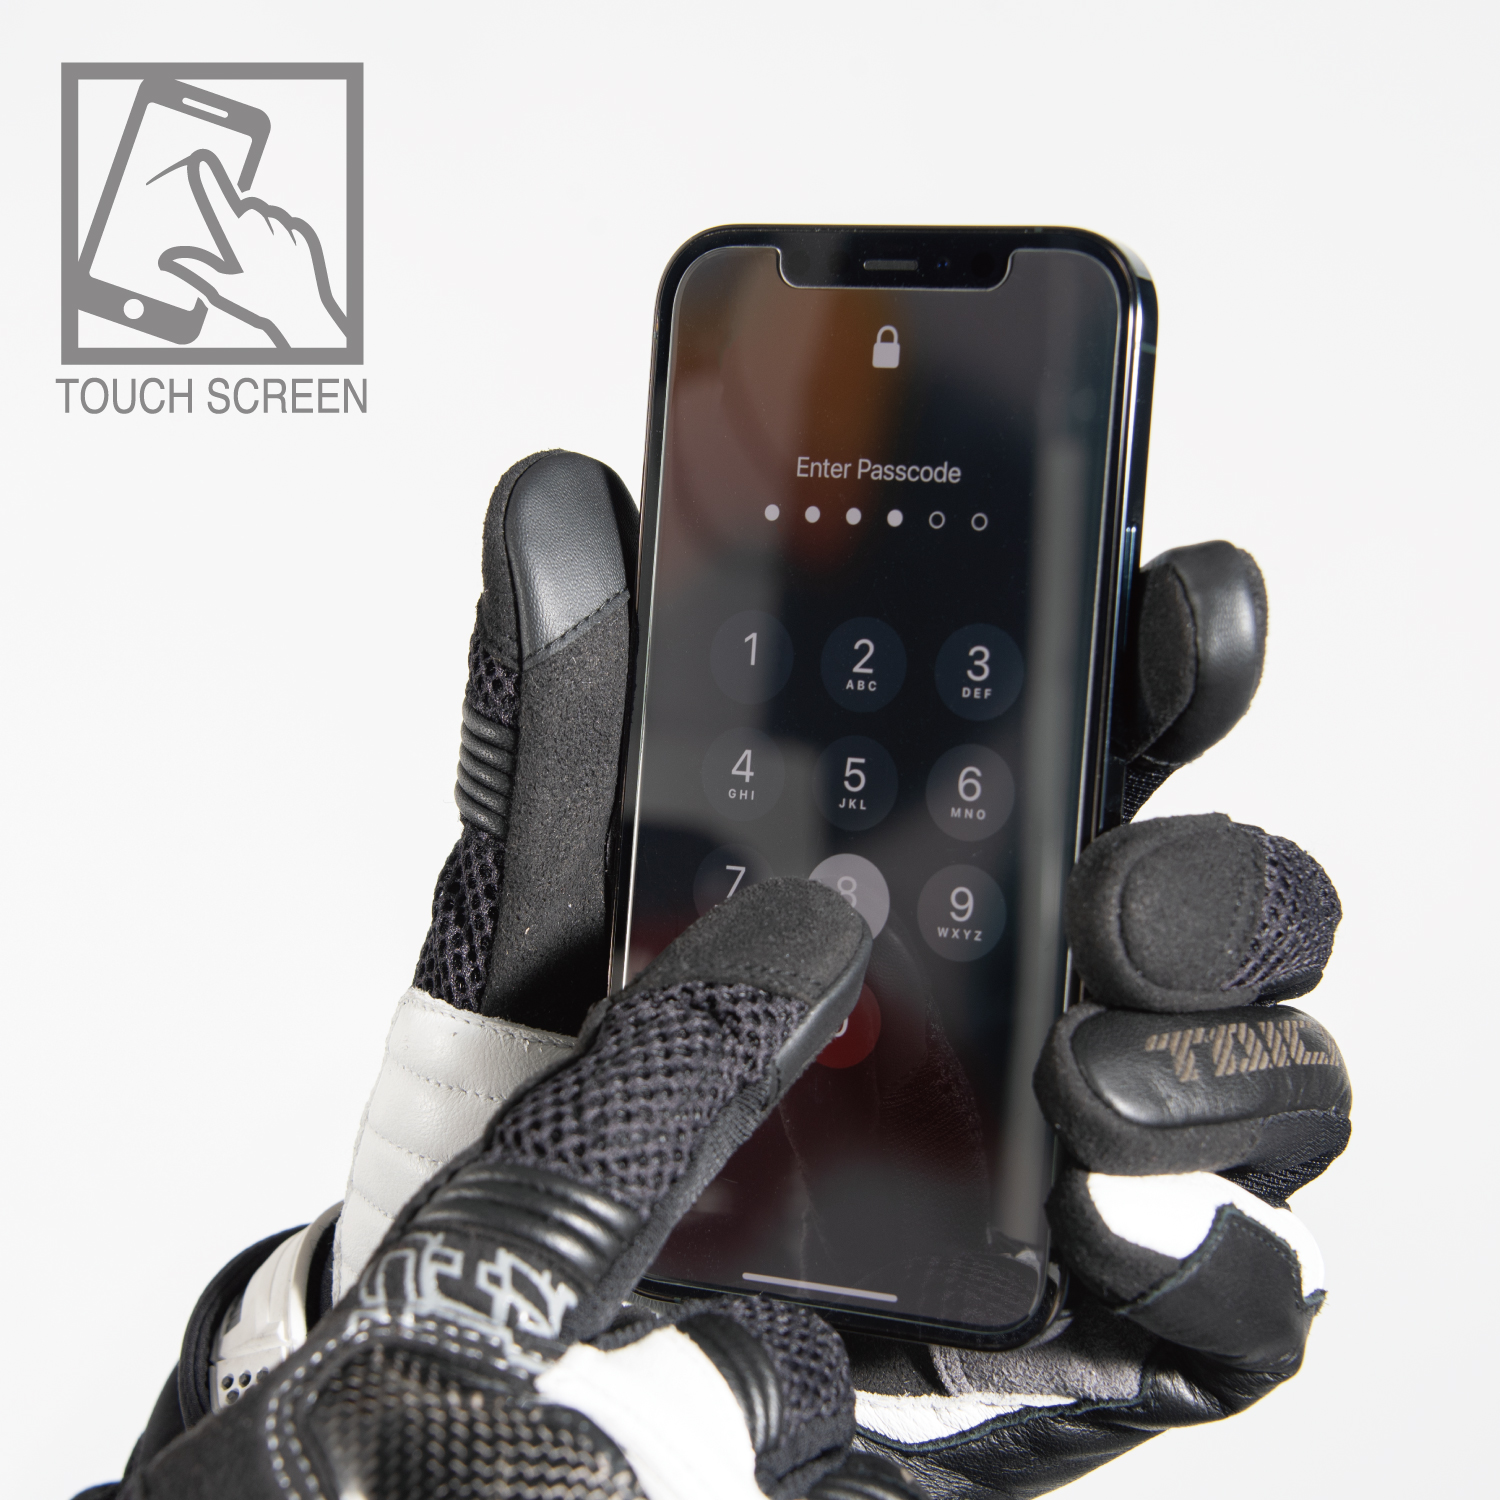 You can operate the smartphone without taking off your glove.